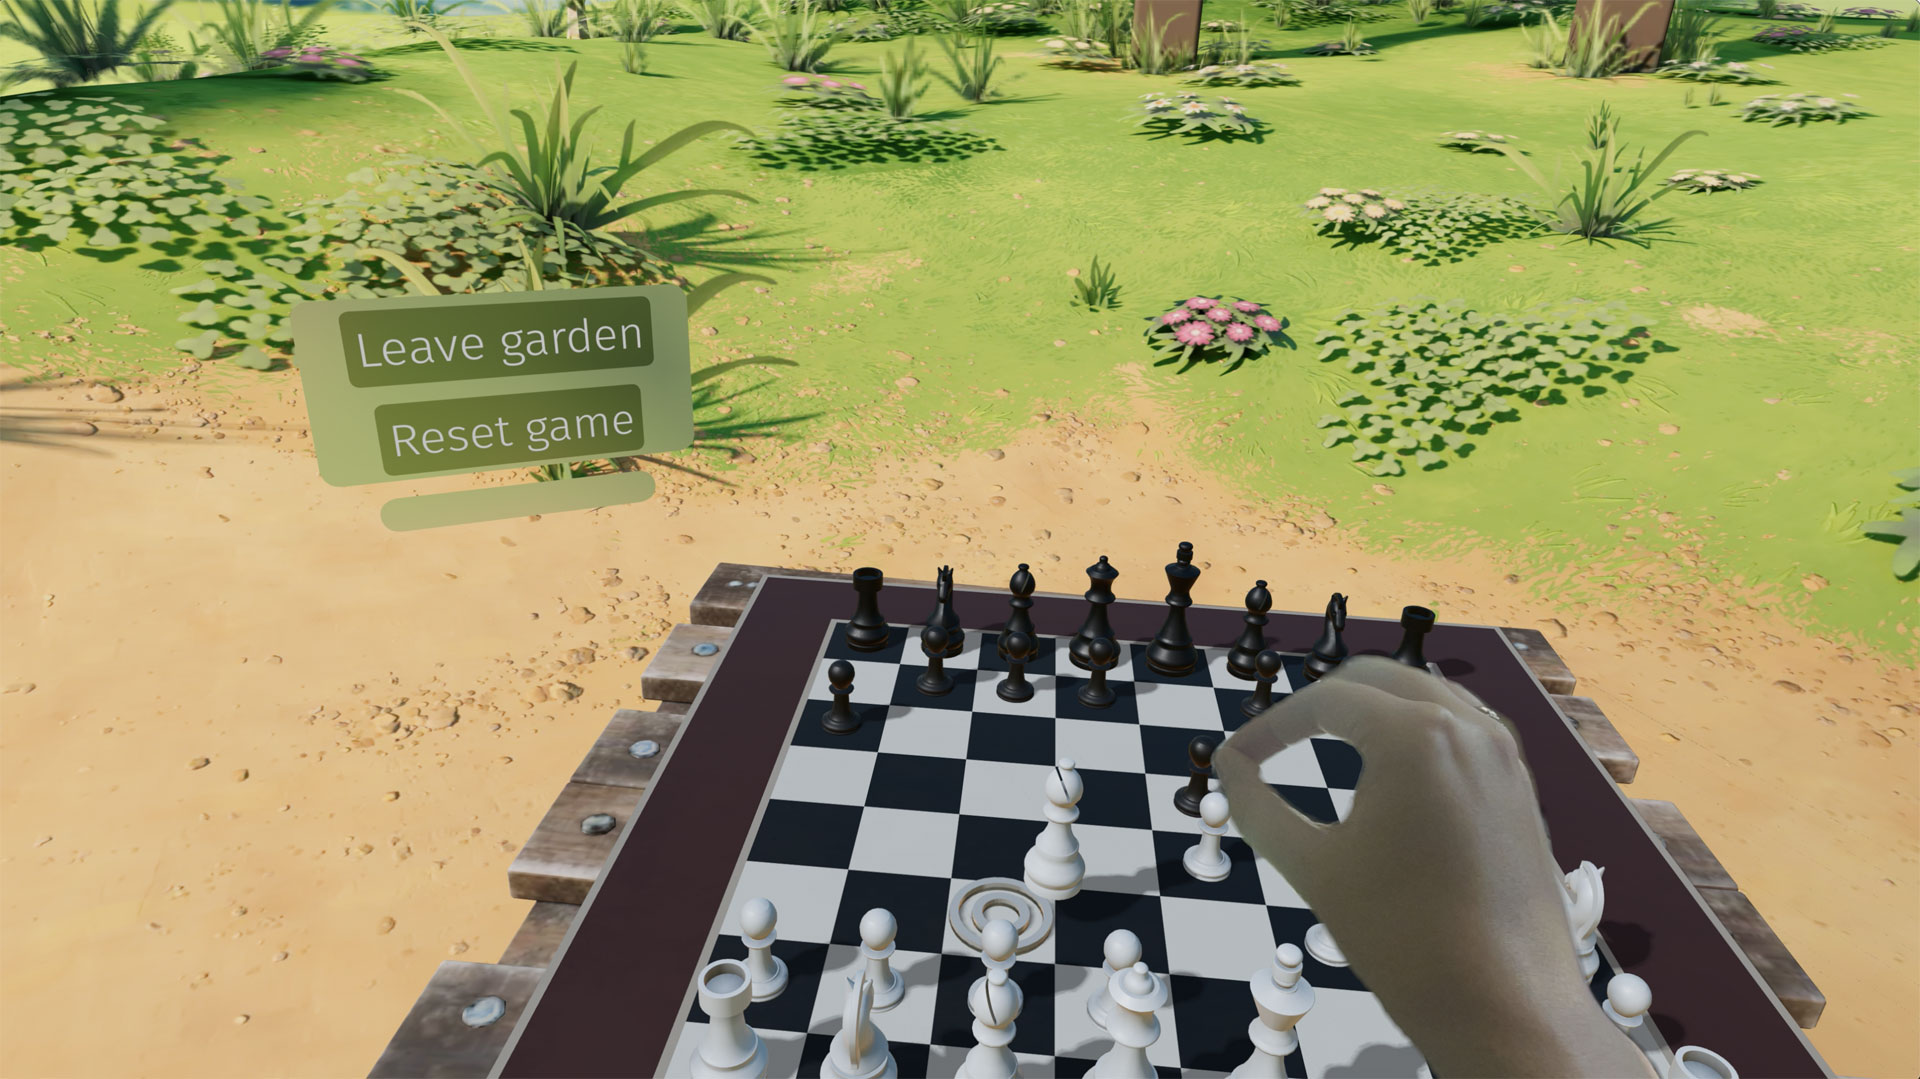 We are in a rendered 3d environment, in a garden. We look at a chess board, with a real human hand lifting a rendered chess piece to make the next move in the game. A floating panel has two buttons reading "Leave garden" and "Reset game".